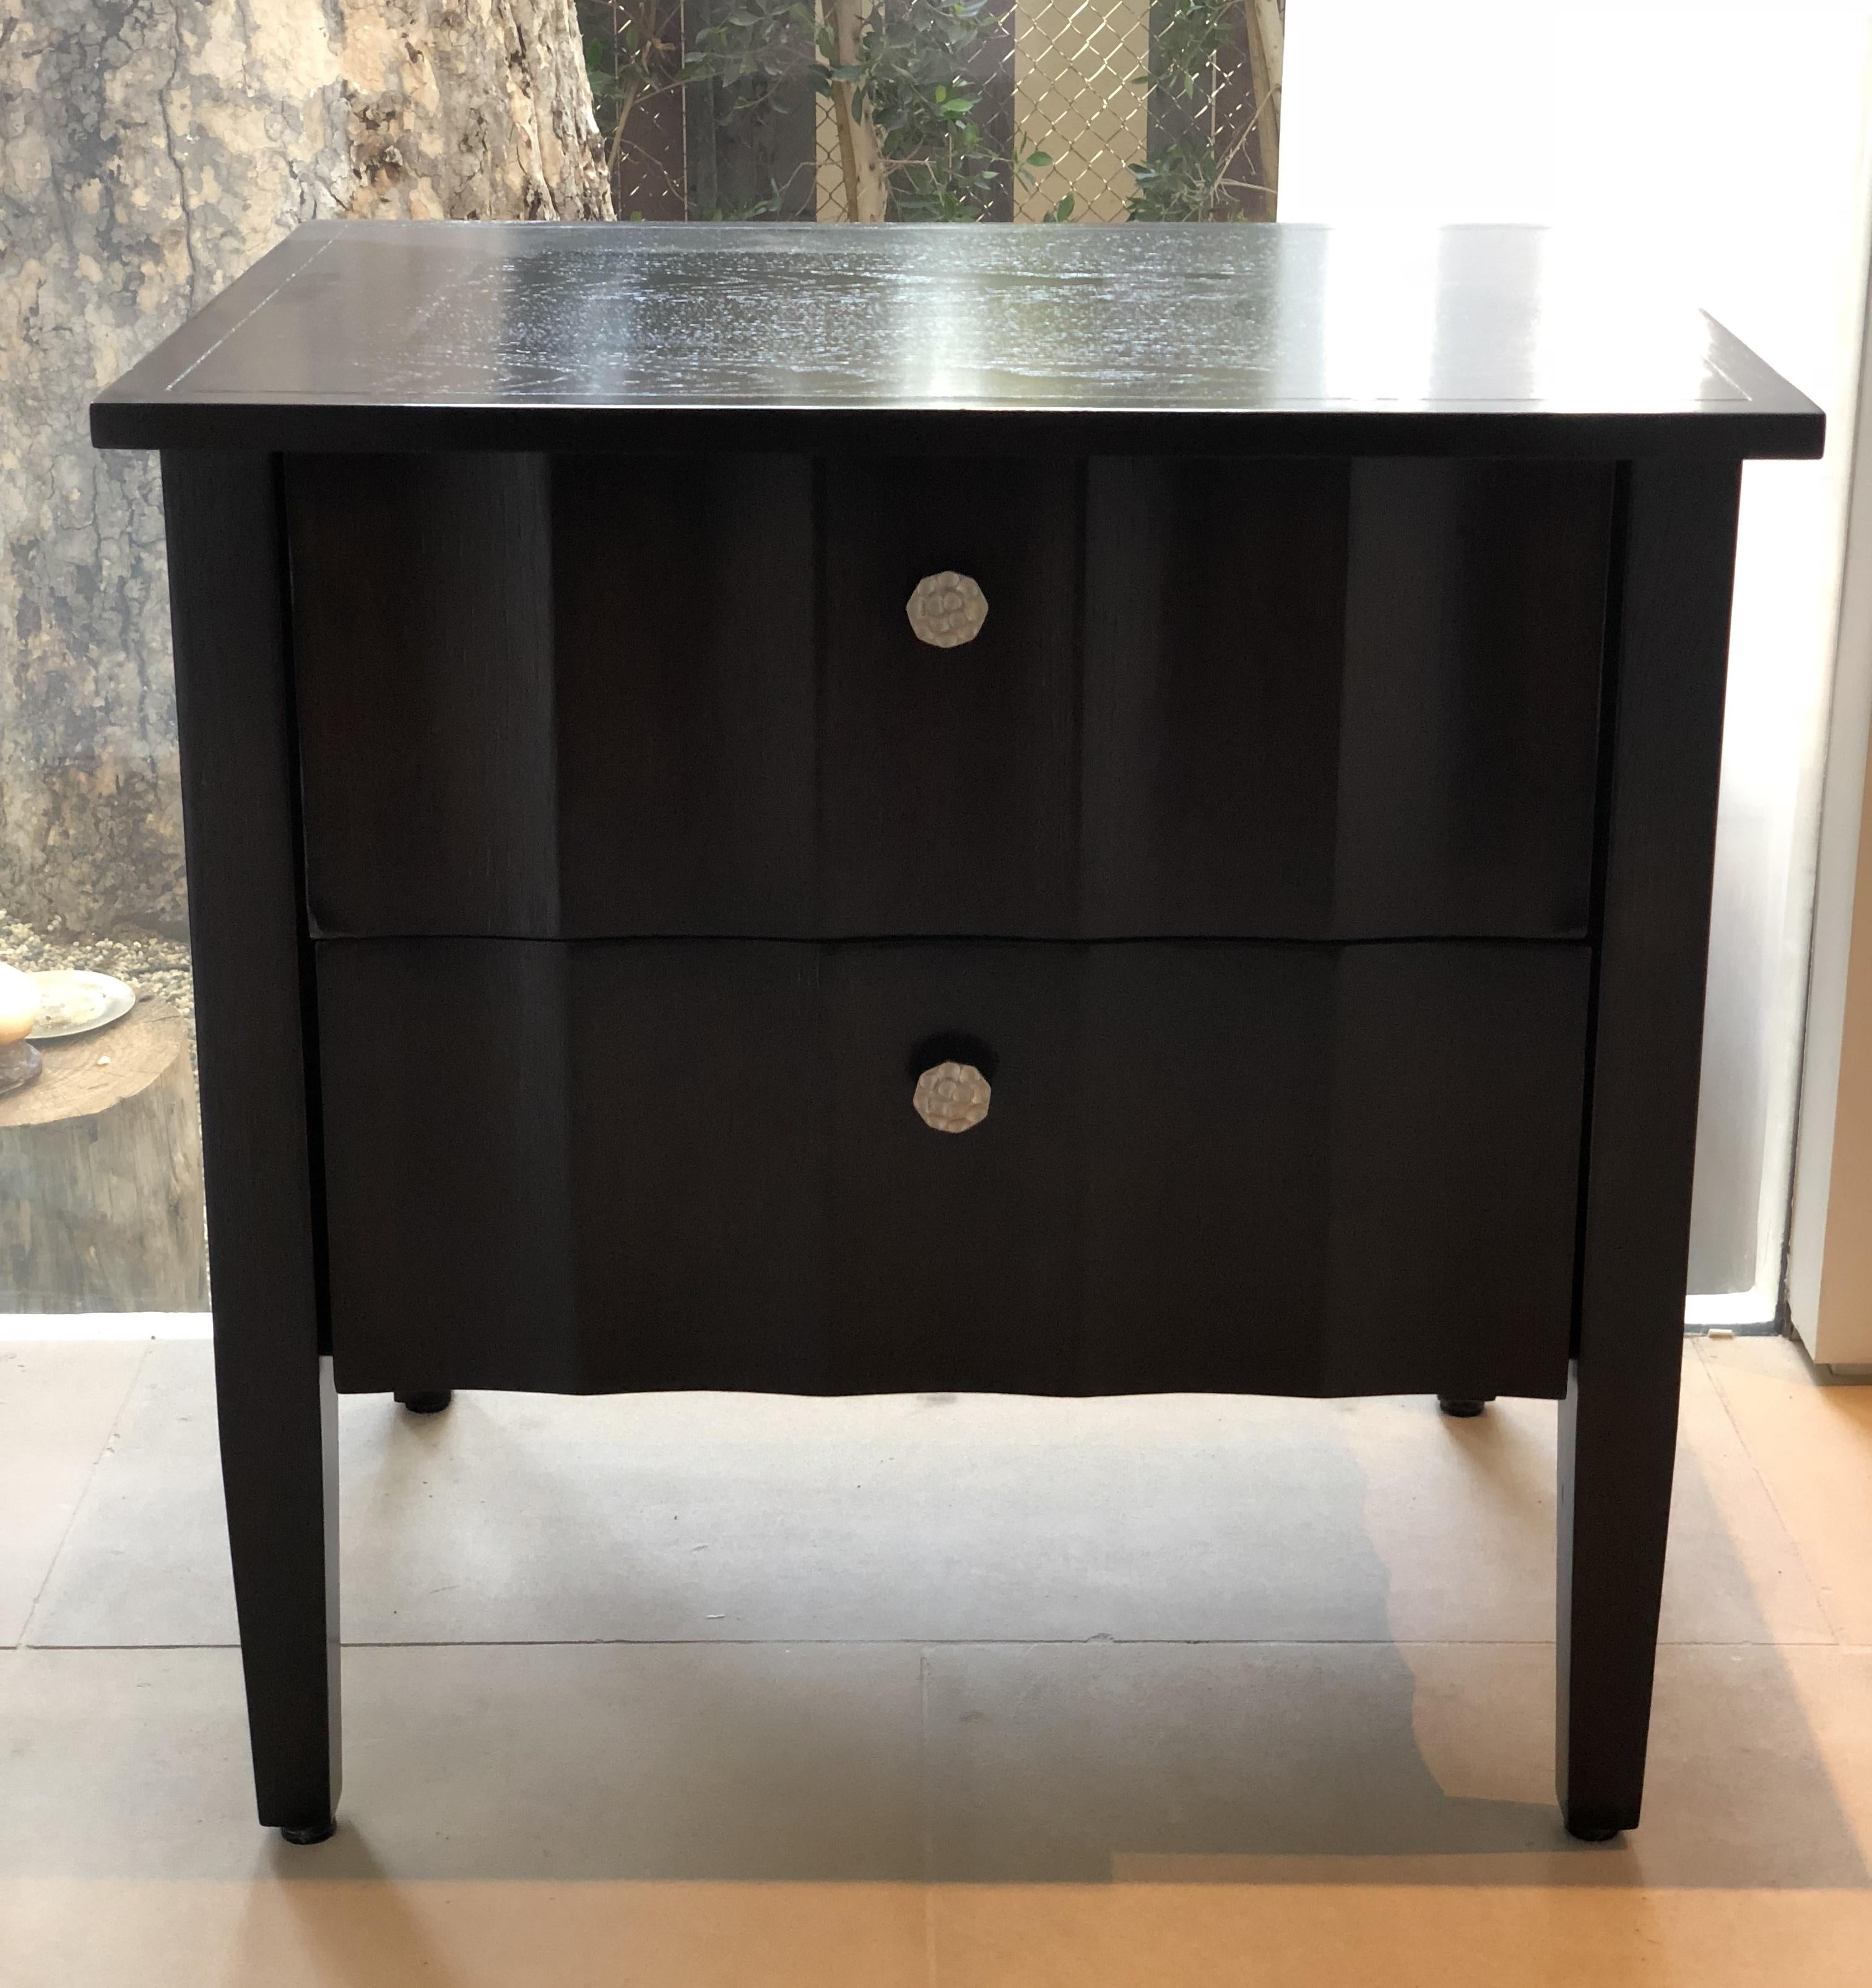 Beautiful set of chocolate brown nightstands with a scalloped detail on front drawers and sides finished in a semigloss lacquered finish, they are in great condition and ready to be displayed.

Measurements:
27